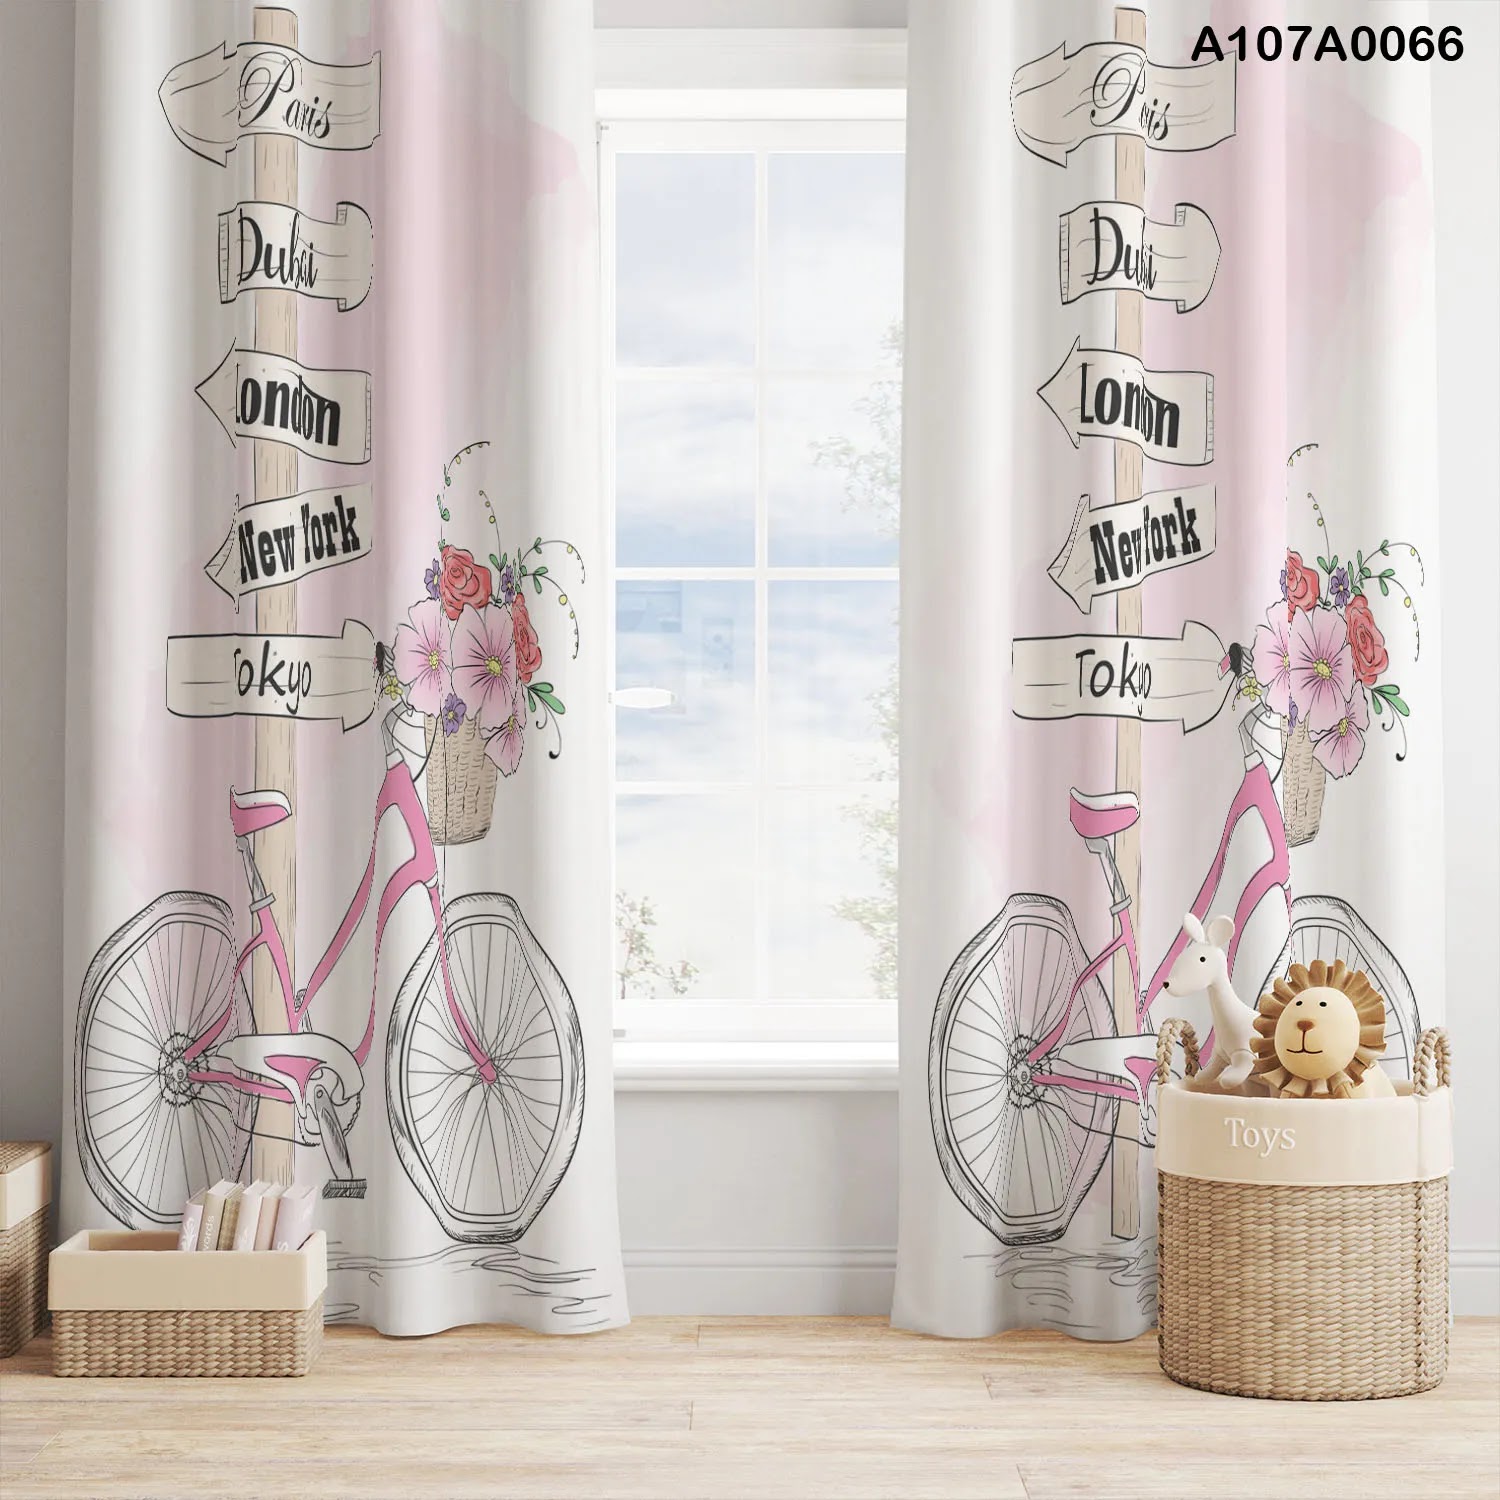 Curtains in pink with bicycle for children room